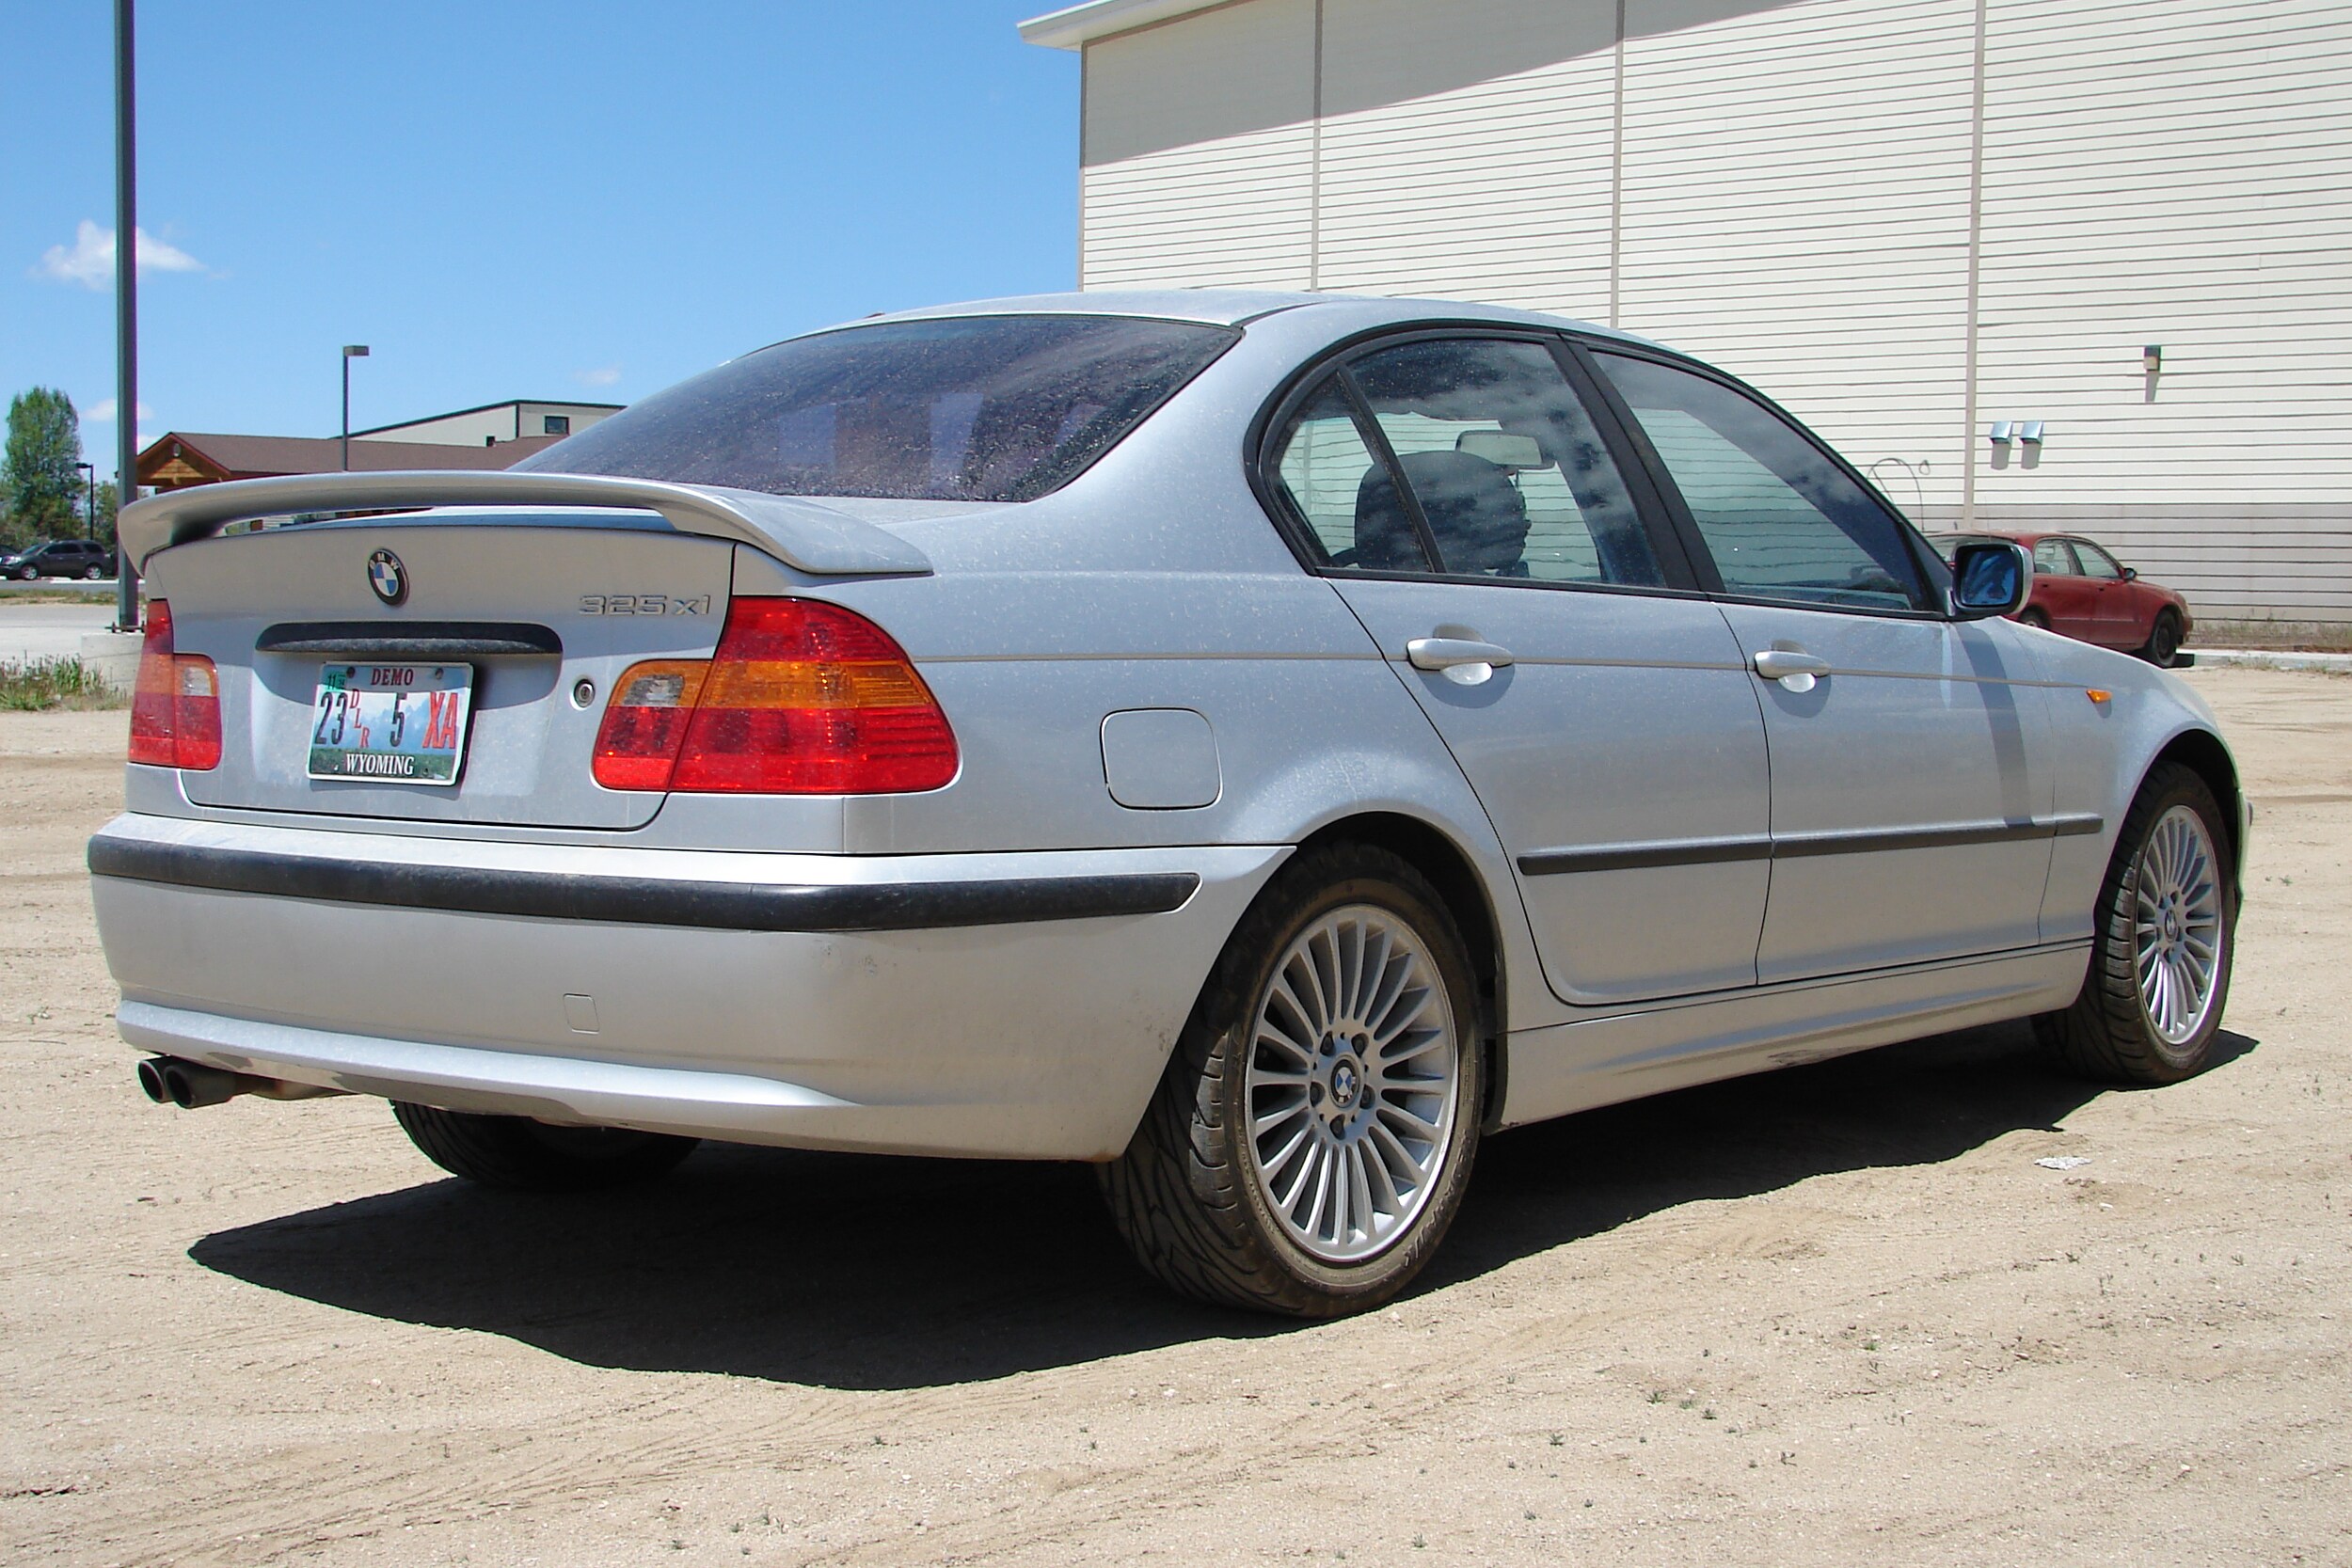 Used 2003 bmw 325xi for sale #6